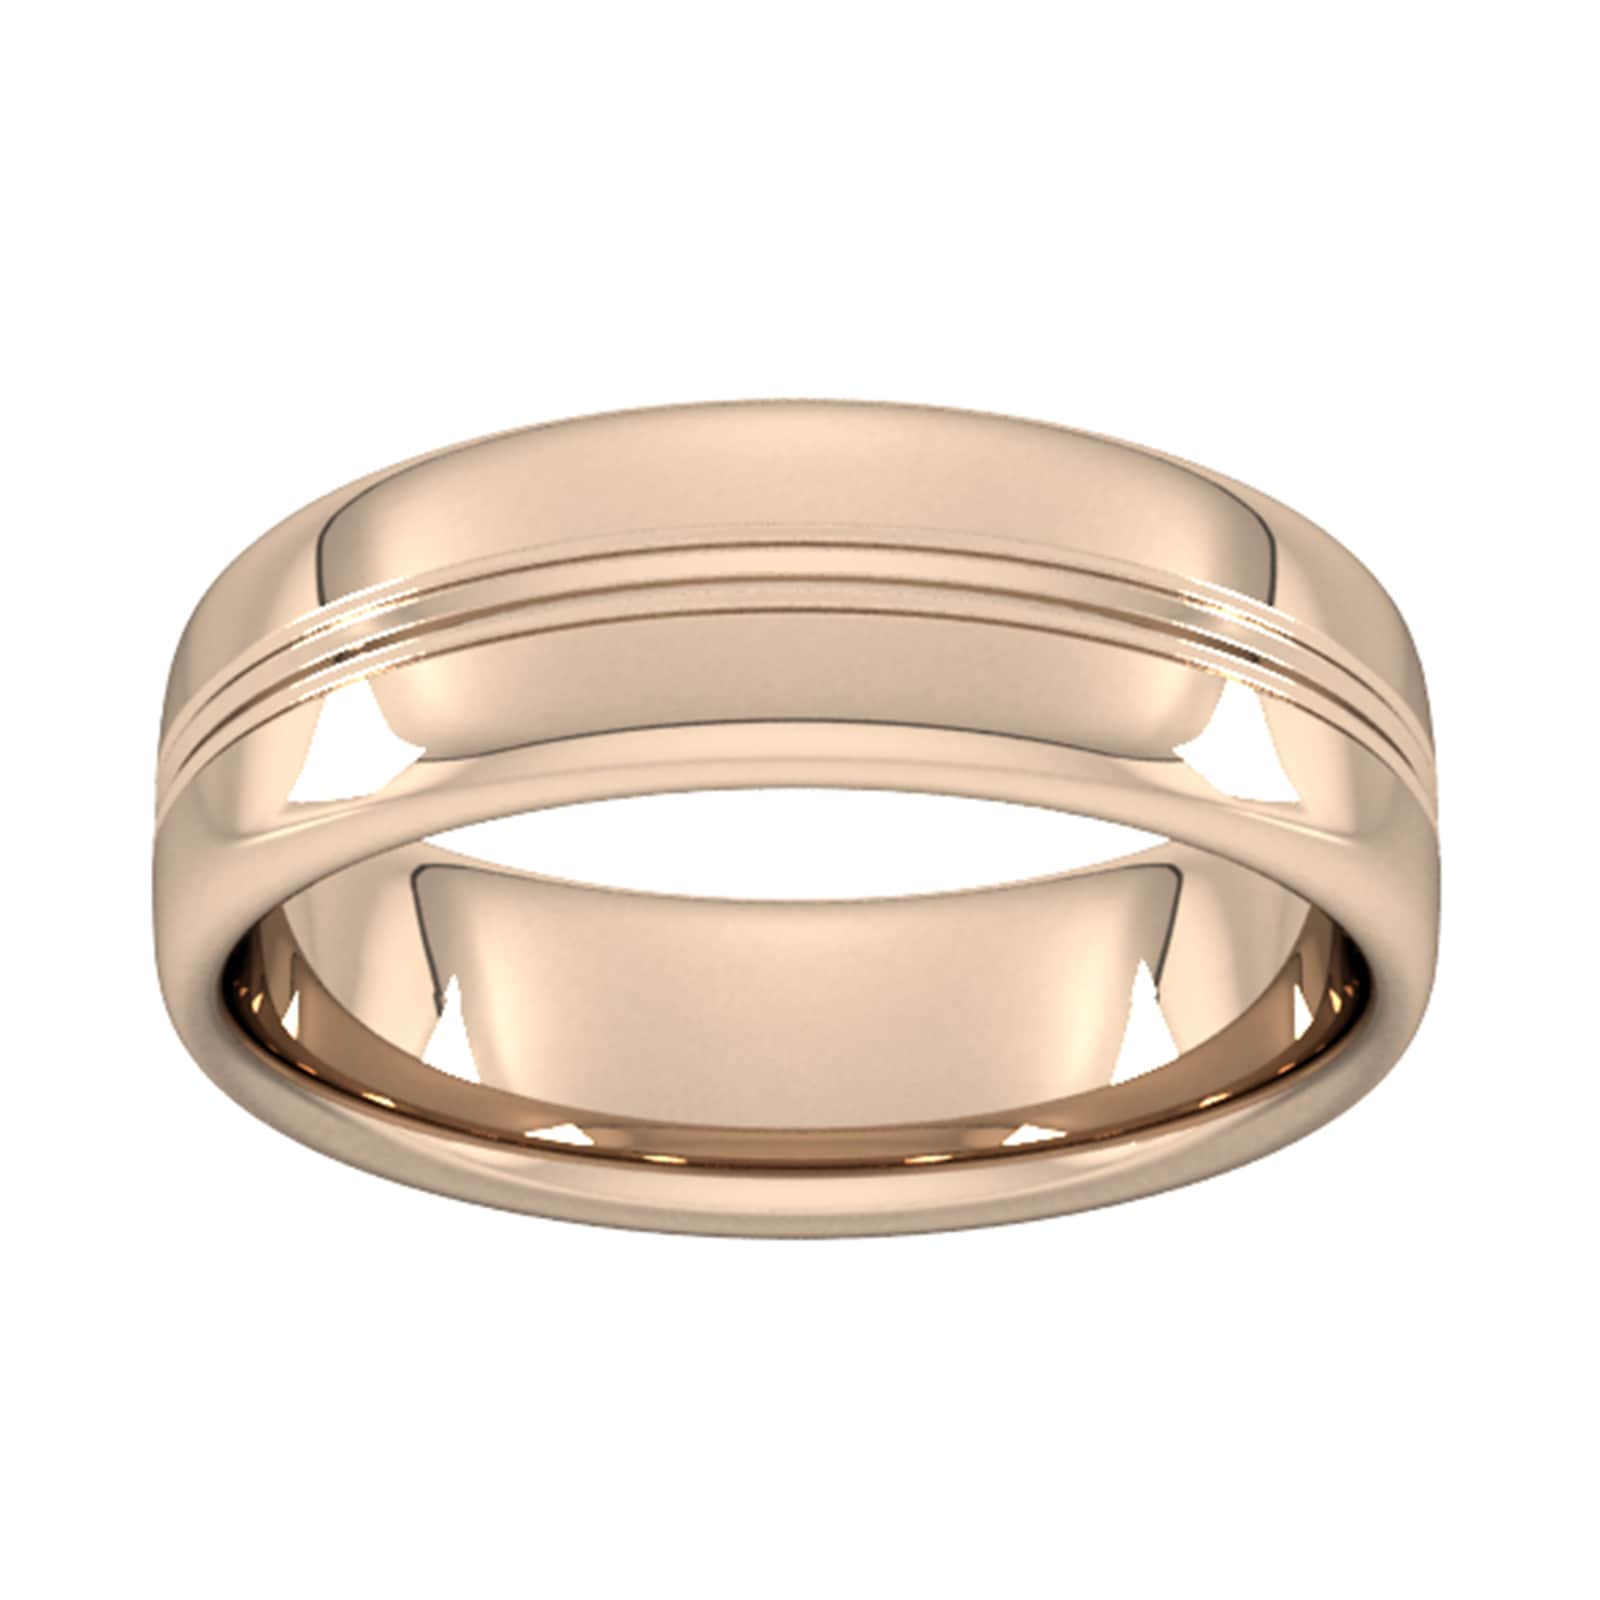 7mm Slight Court Extra Heavy Grooved Polished Finish Wedding Ring In 18 Carat Rose Gold - Ring Size K